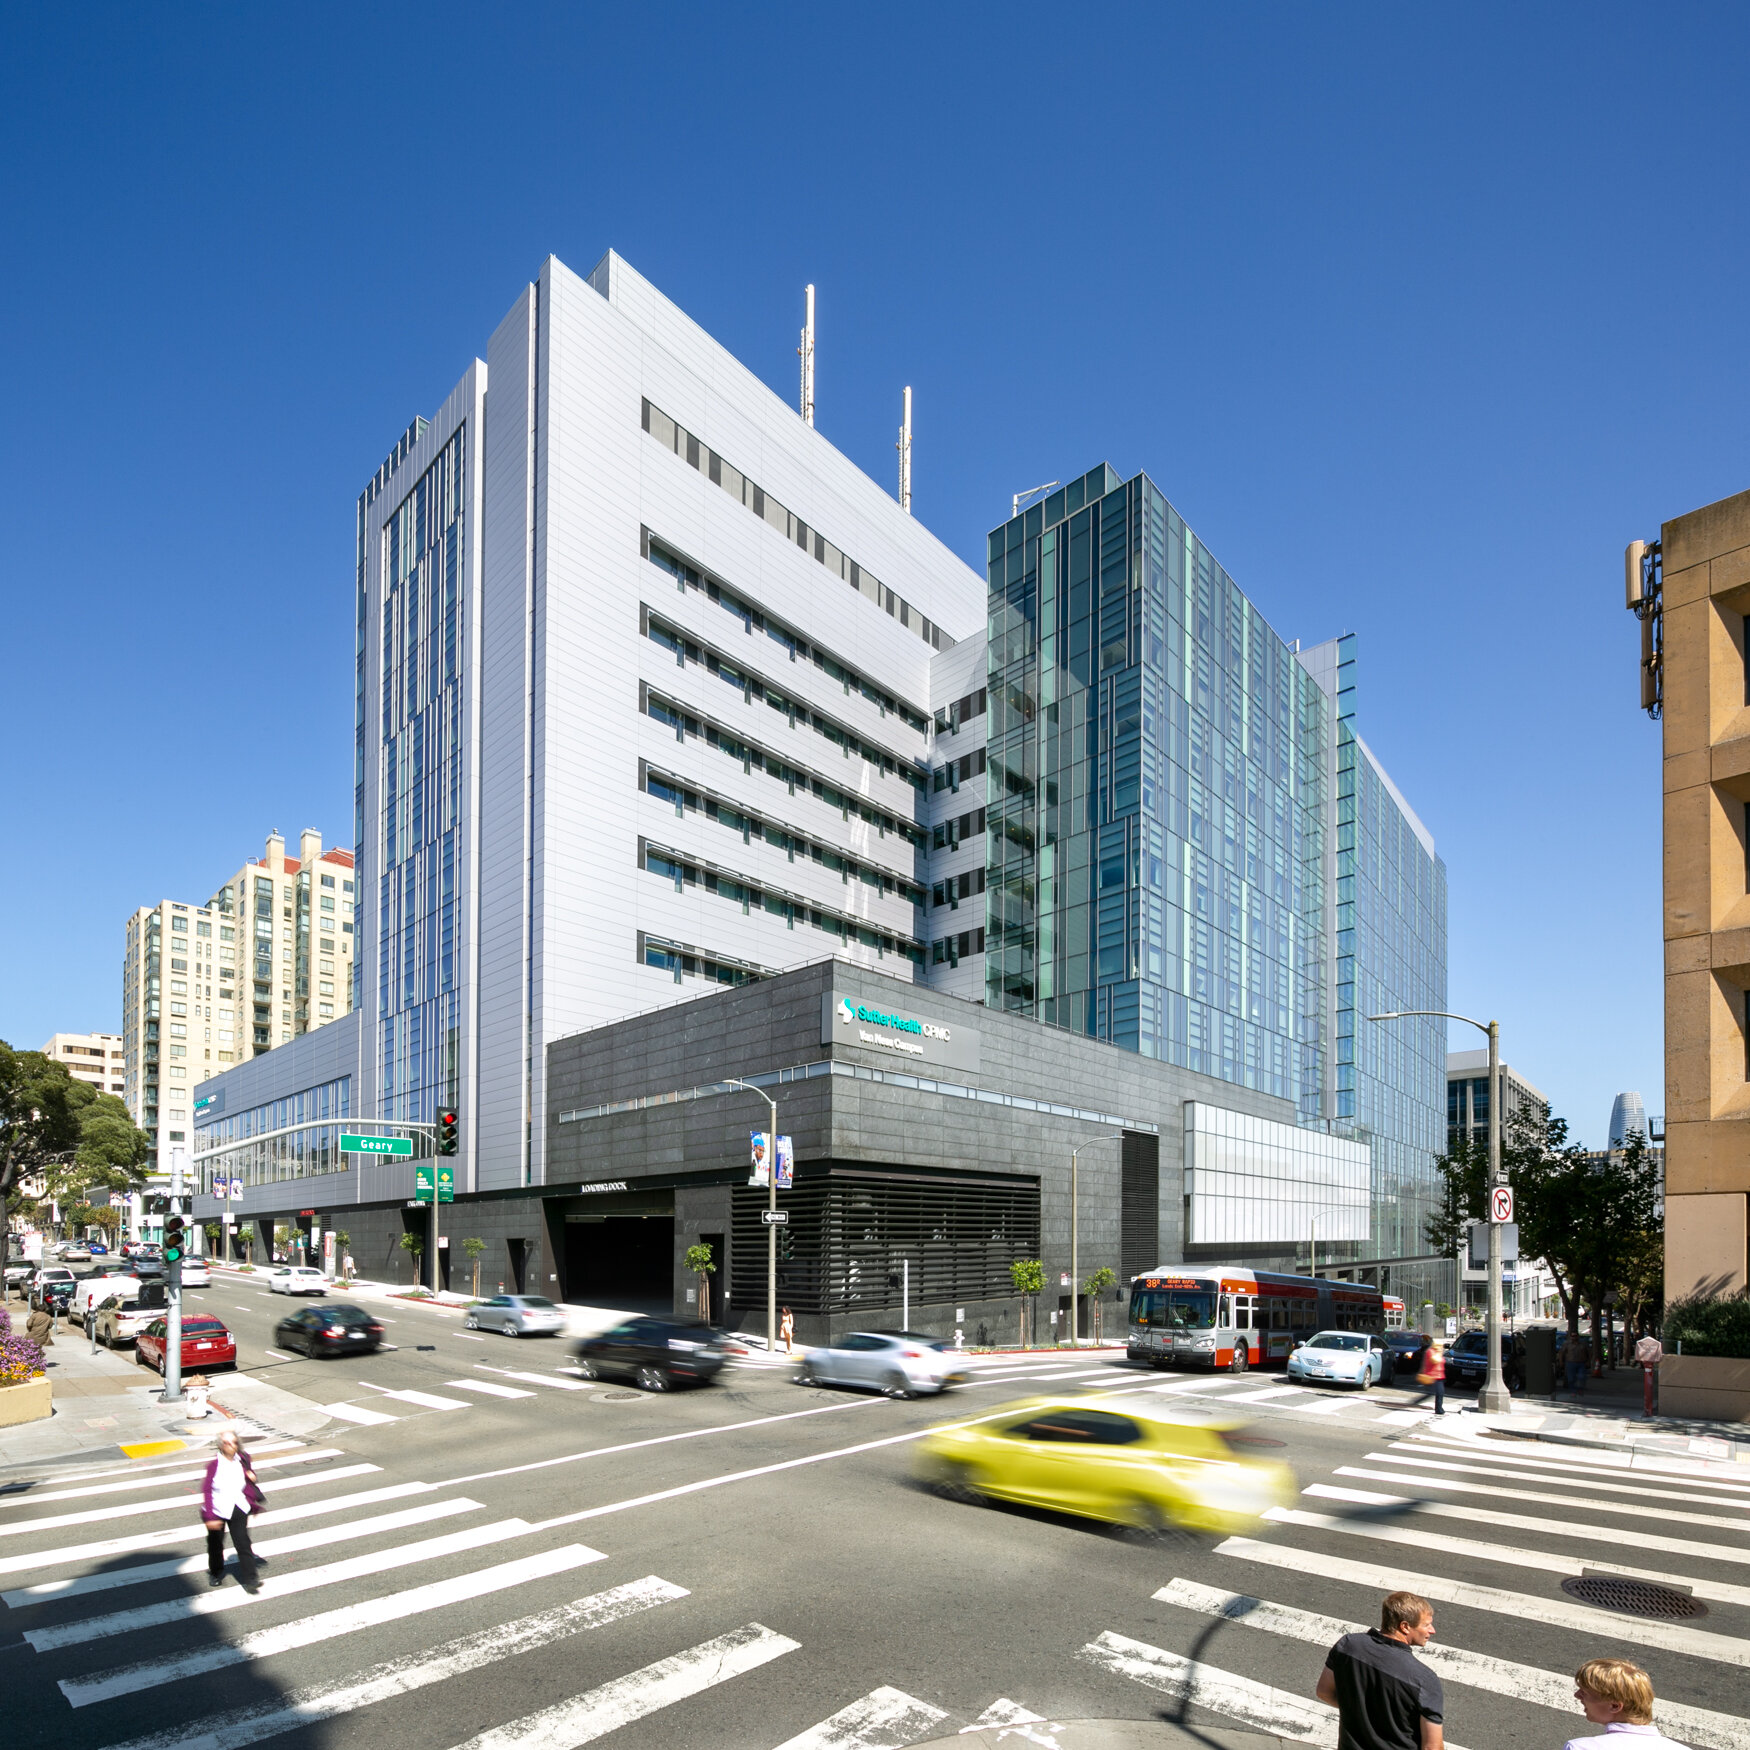 Shutter Health CPMC Van Ness Campus - San Francisco, CA - Sutter Health and SmithGroup